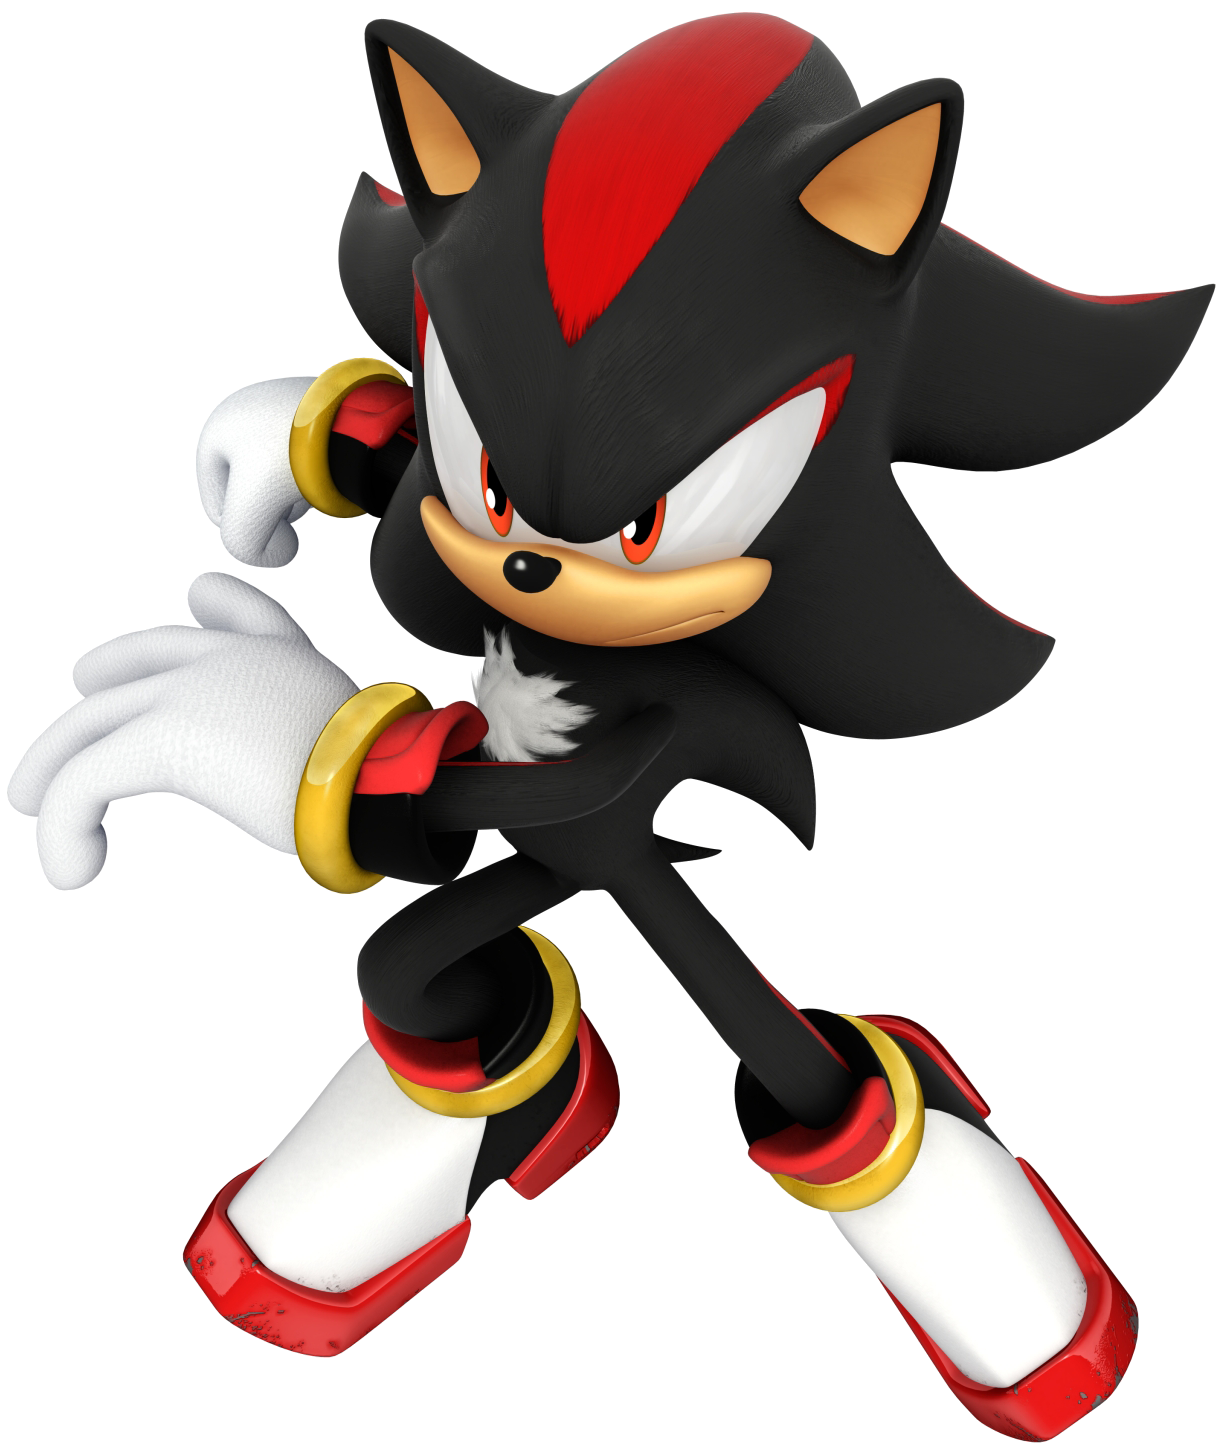 Images of Shadow The Hedgehog | 1226x1448